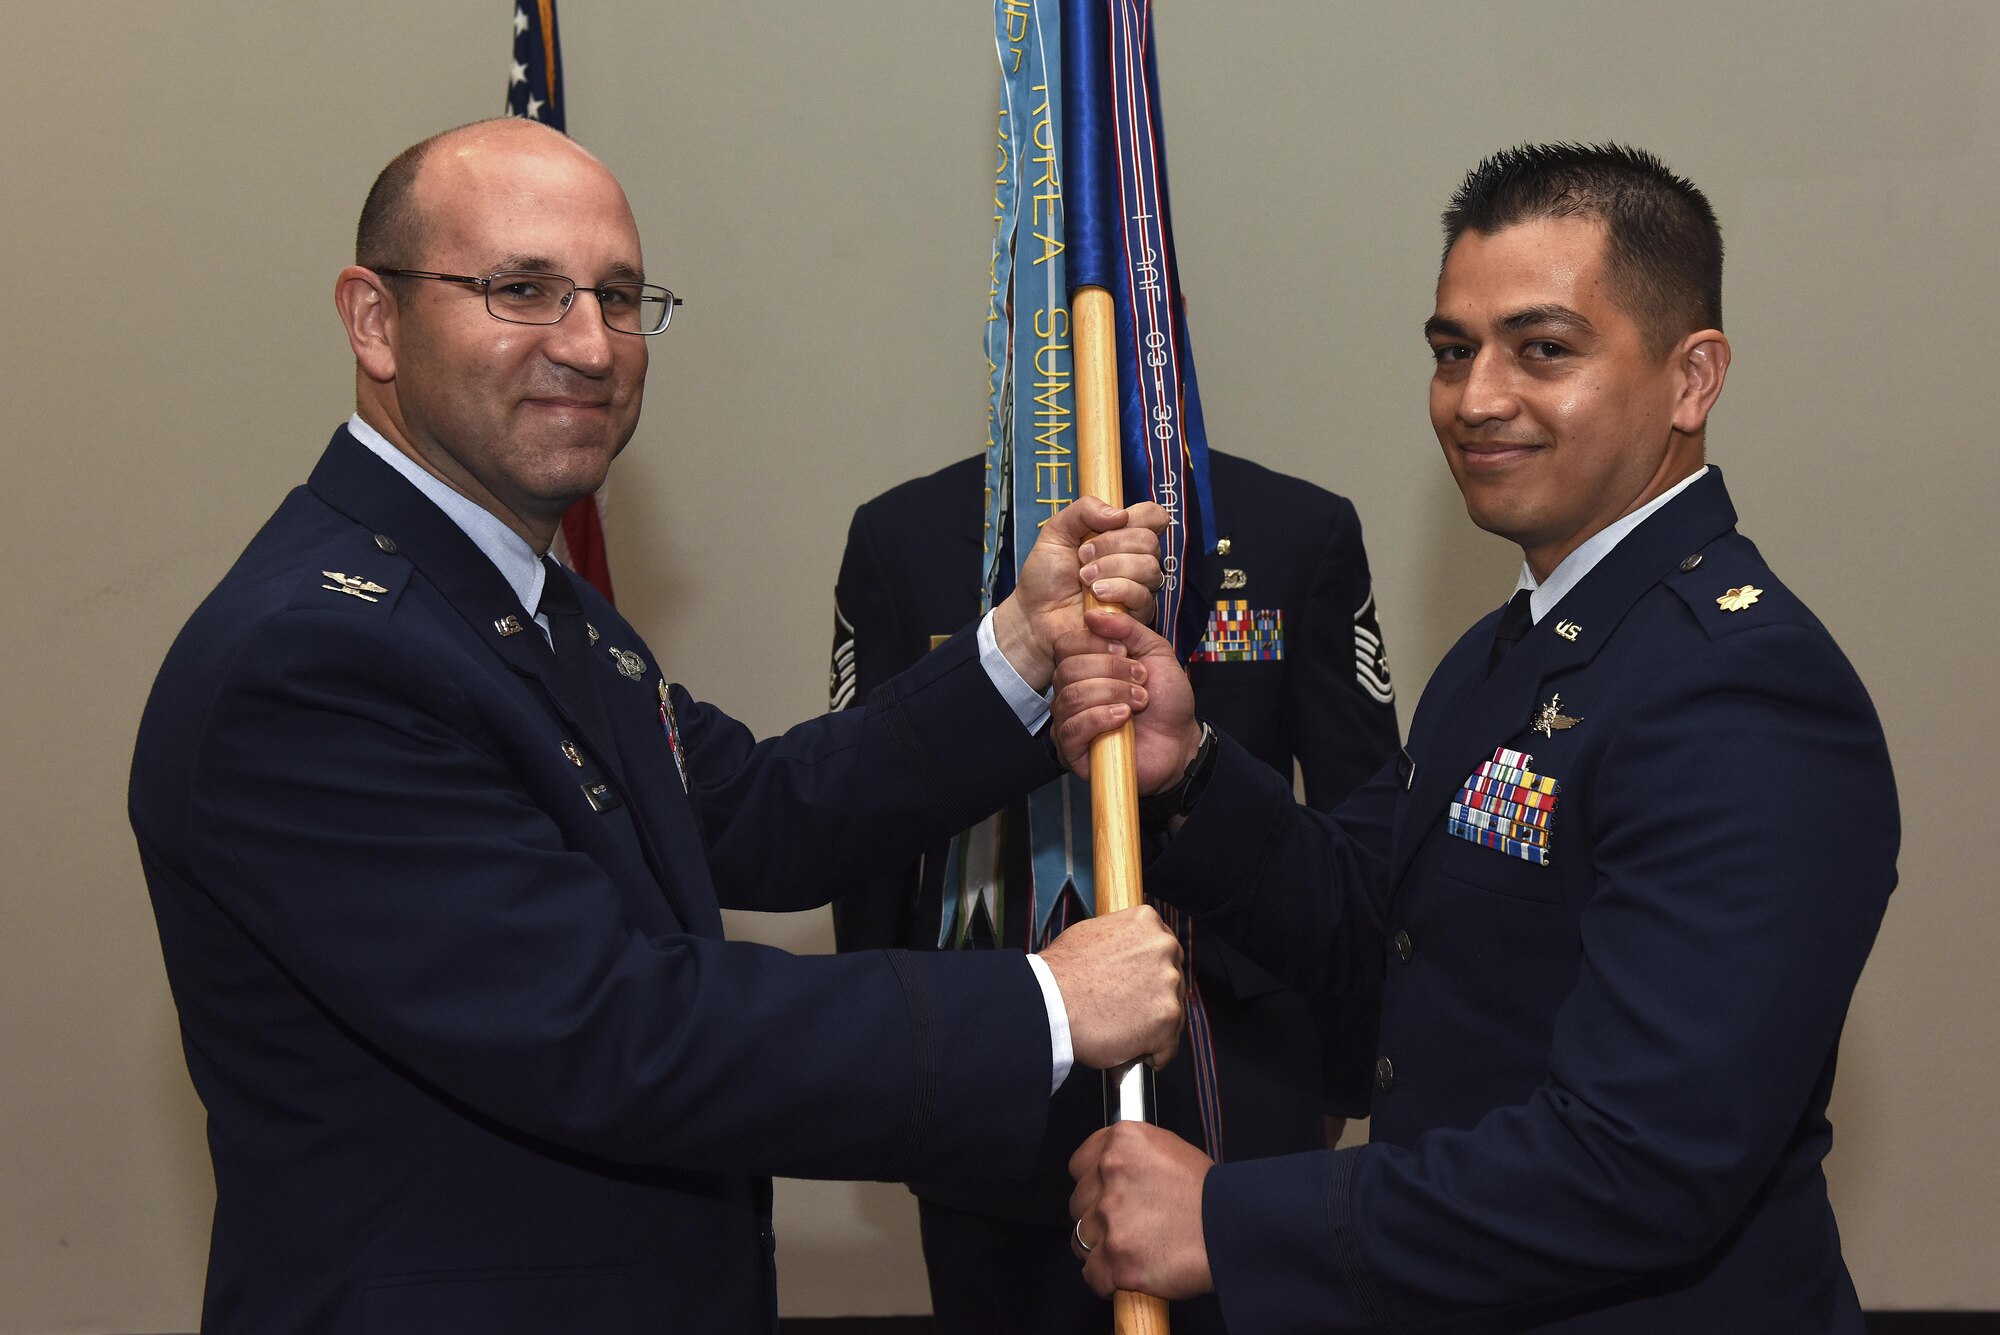 U.S. Air Force Col. Christopher Harris, 17th Mission Support Group commander, passes the unit guideon to Maj. Mark Walkusky, the new 17th Communications Squadron commander, during the 17th CS change of command ceremony at the Event Center on Goodfellow Air Force Base, Texas.